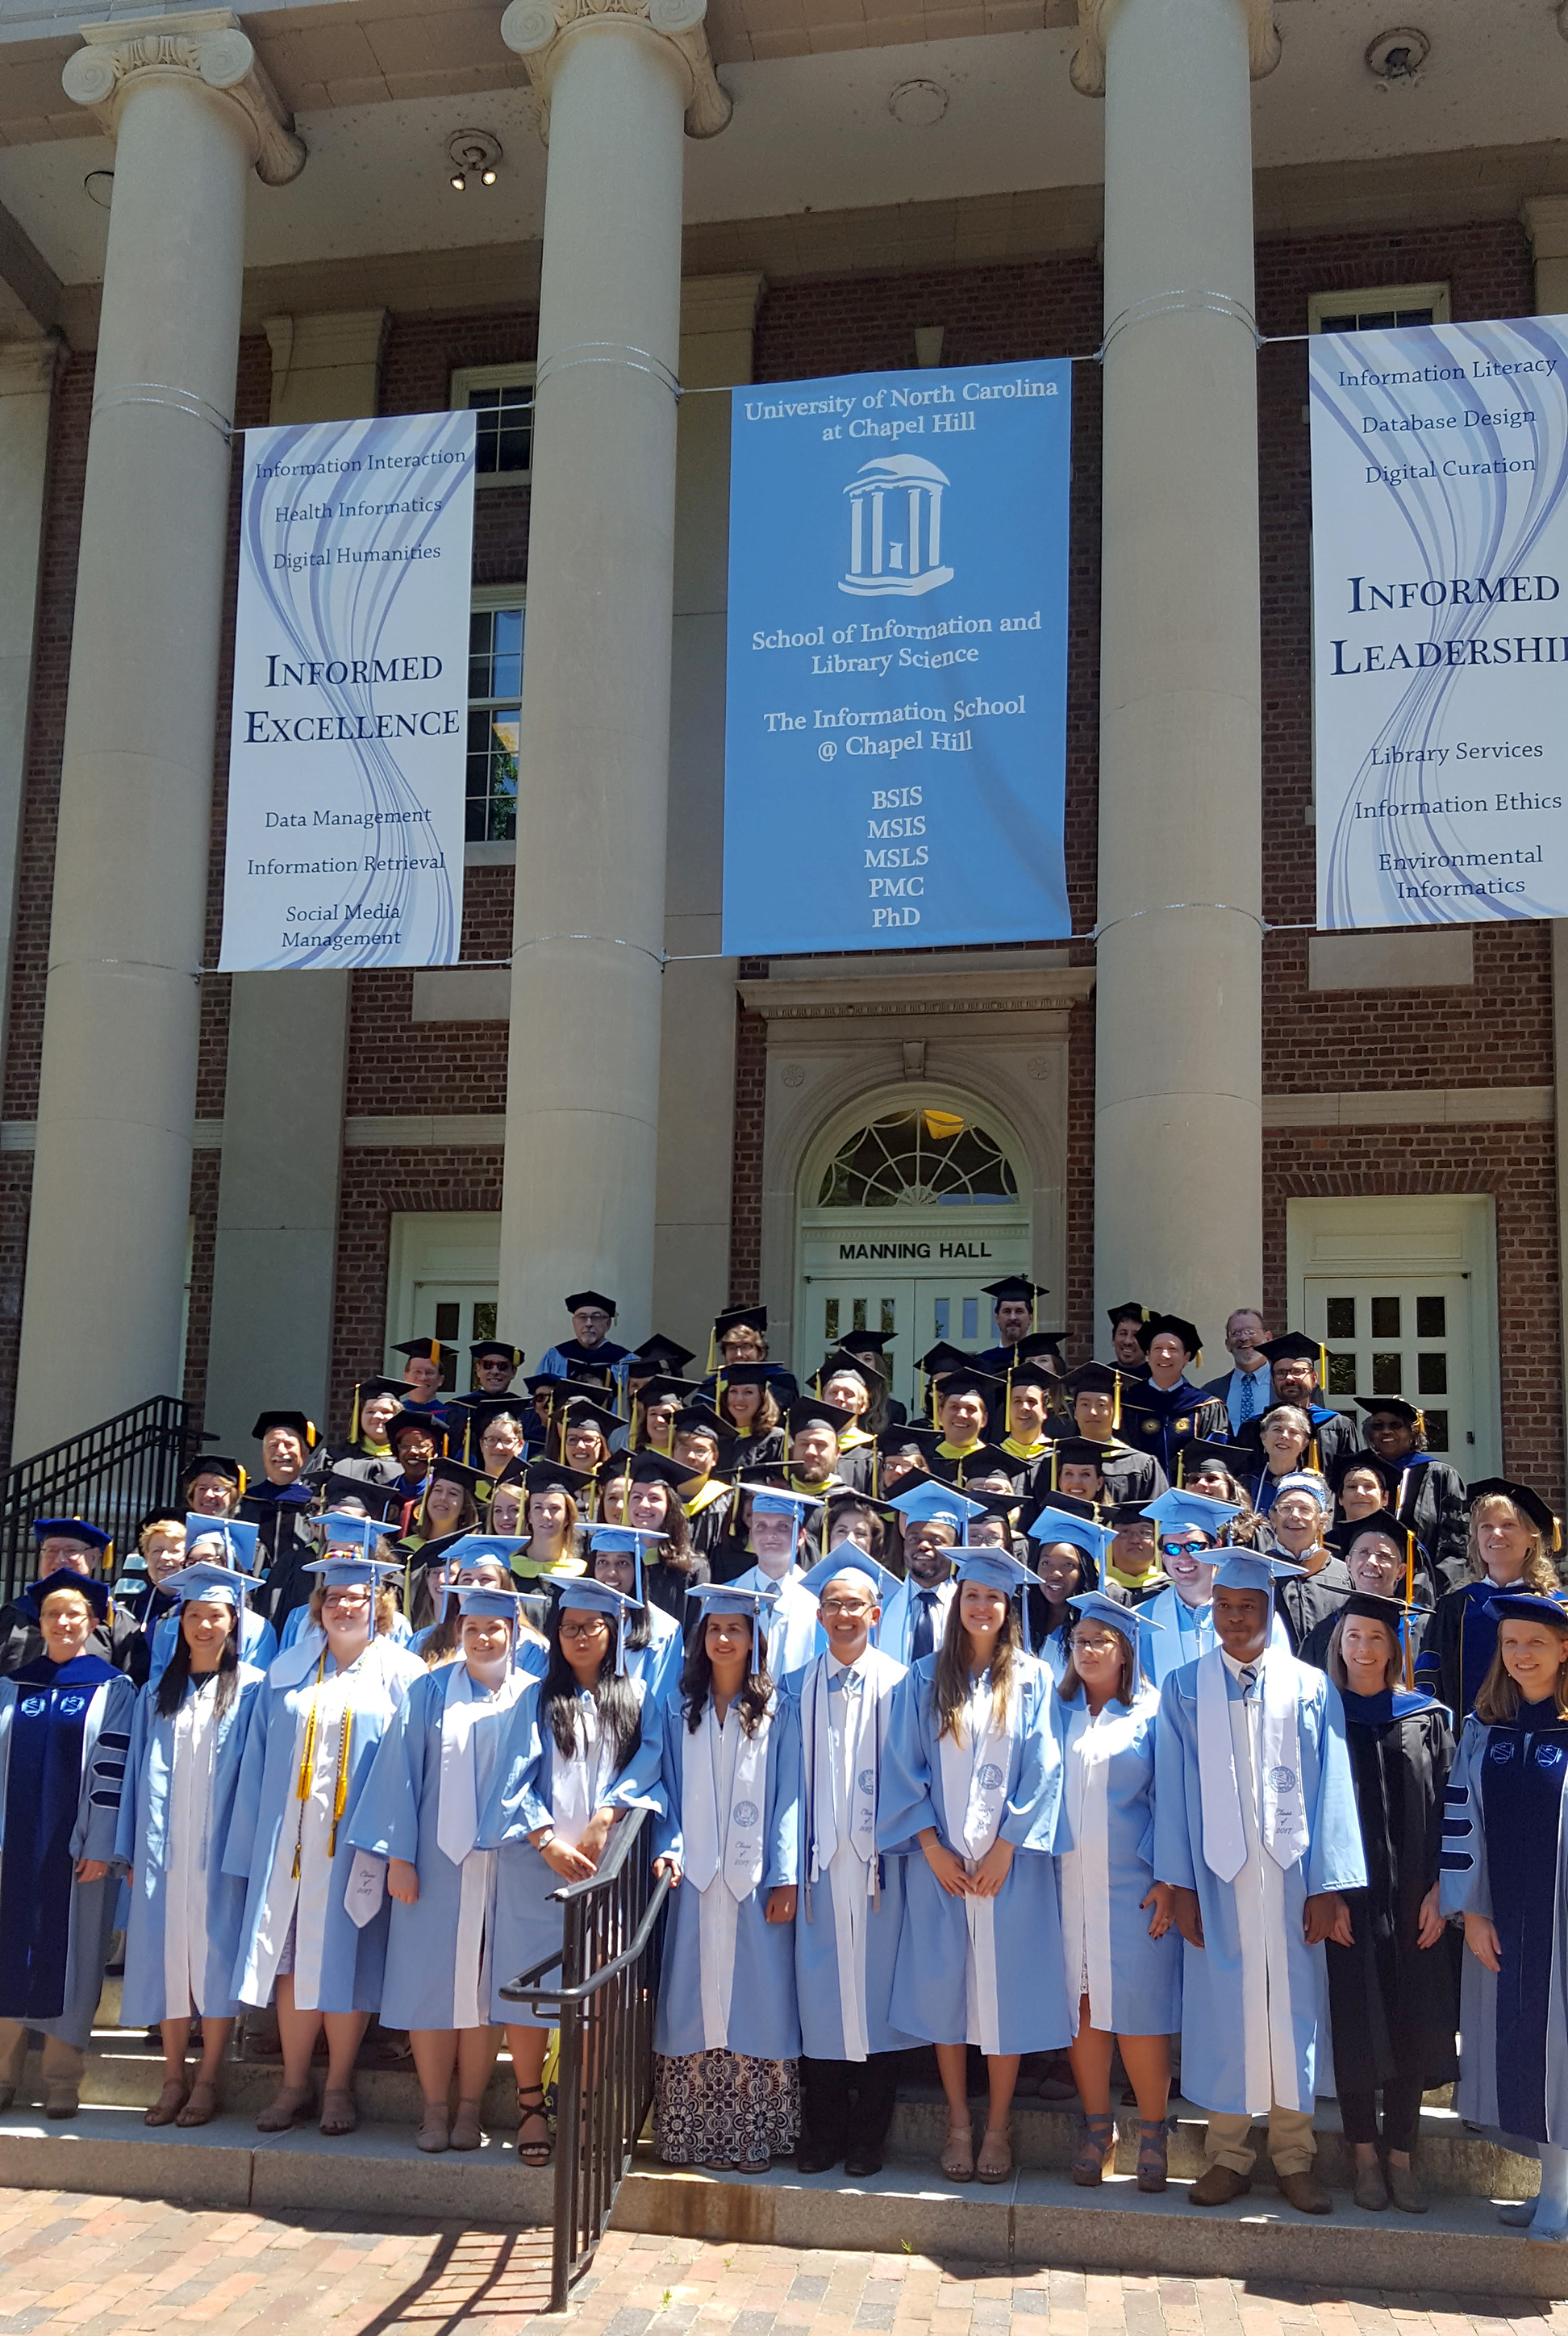 graduation day, May 2017, in front of Manning Hall